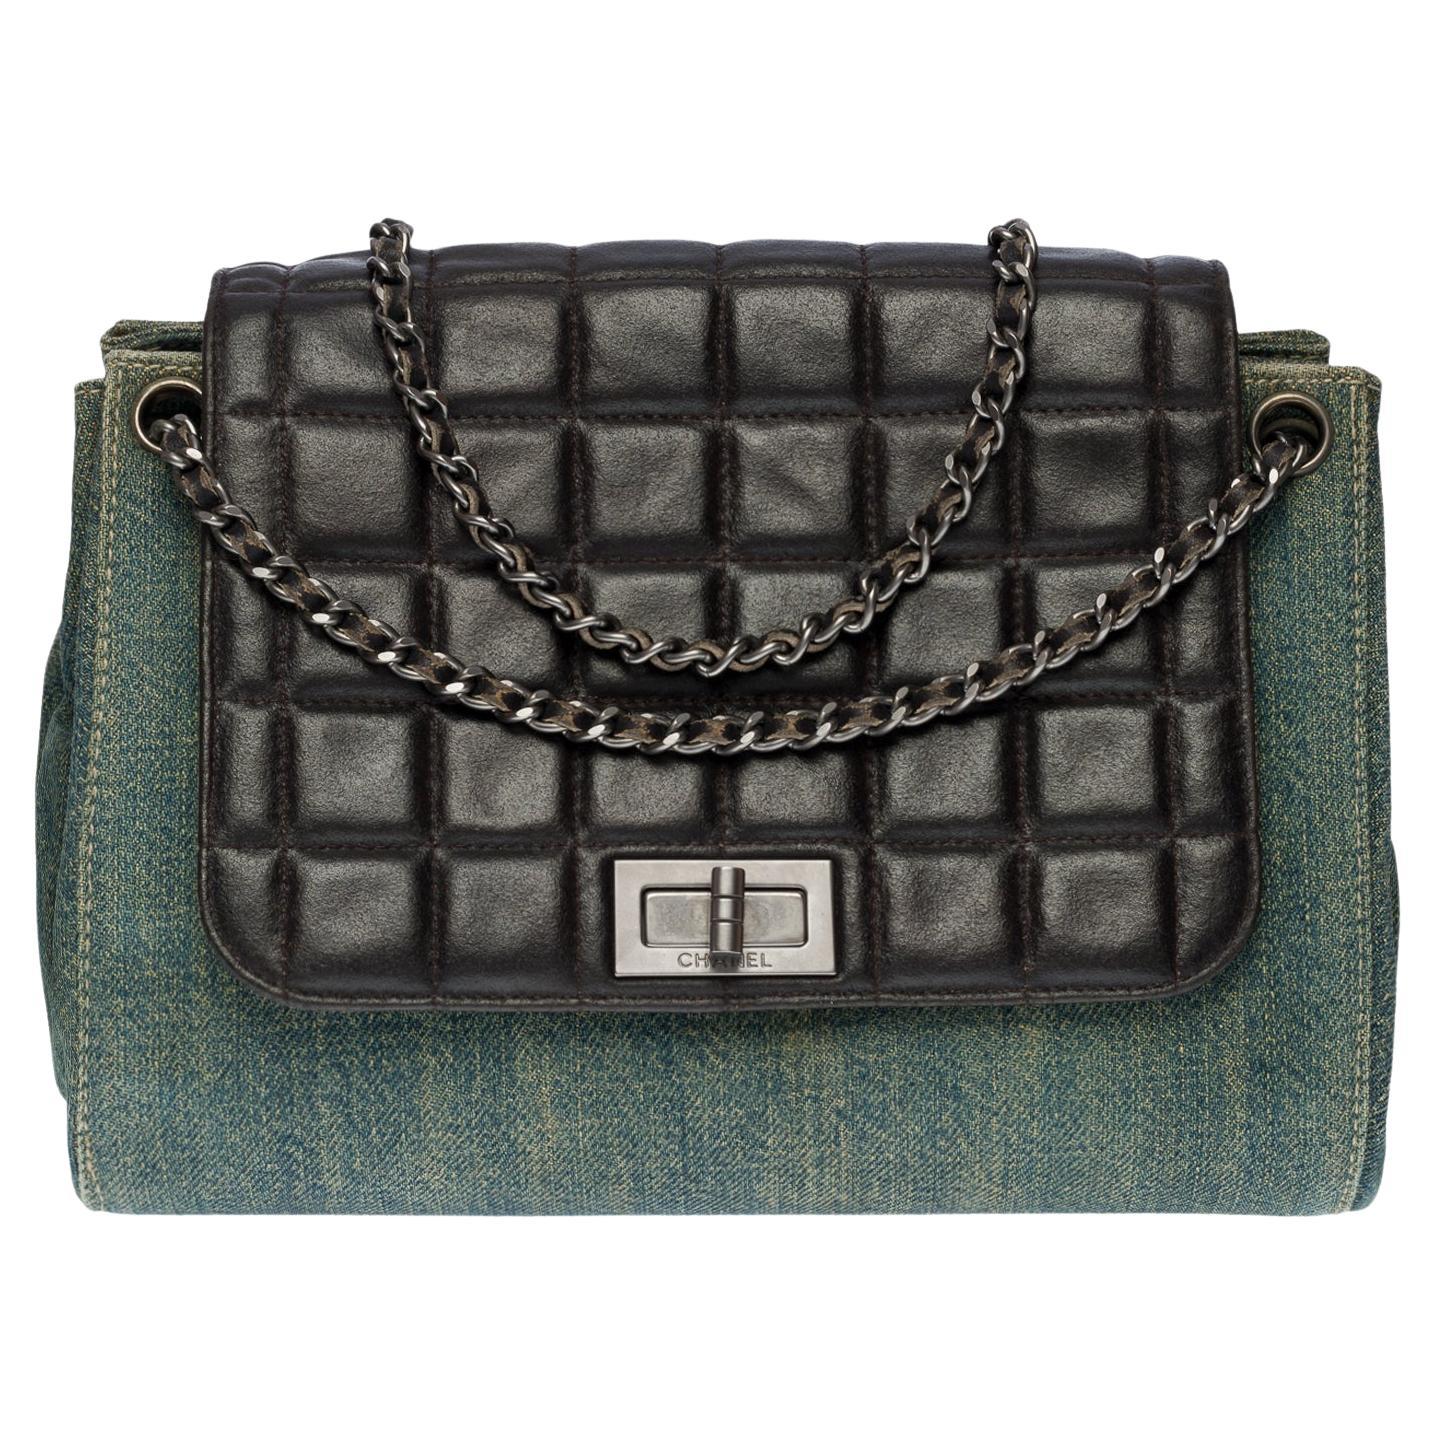 Chanel Classic Chocolate Bar shoulder flap bag in denim and black leather, SHW